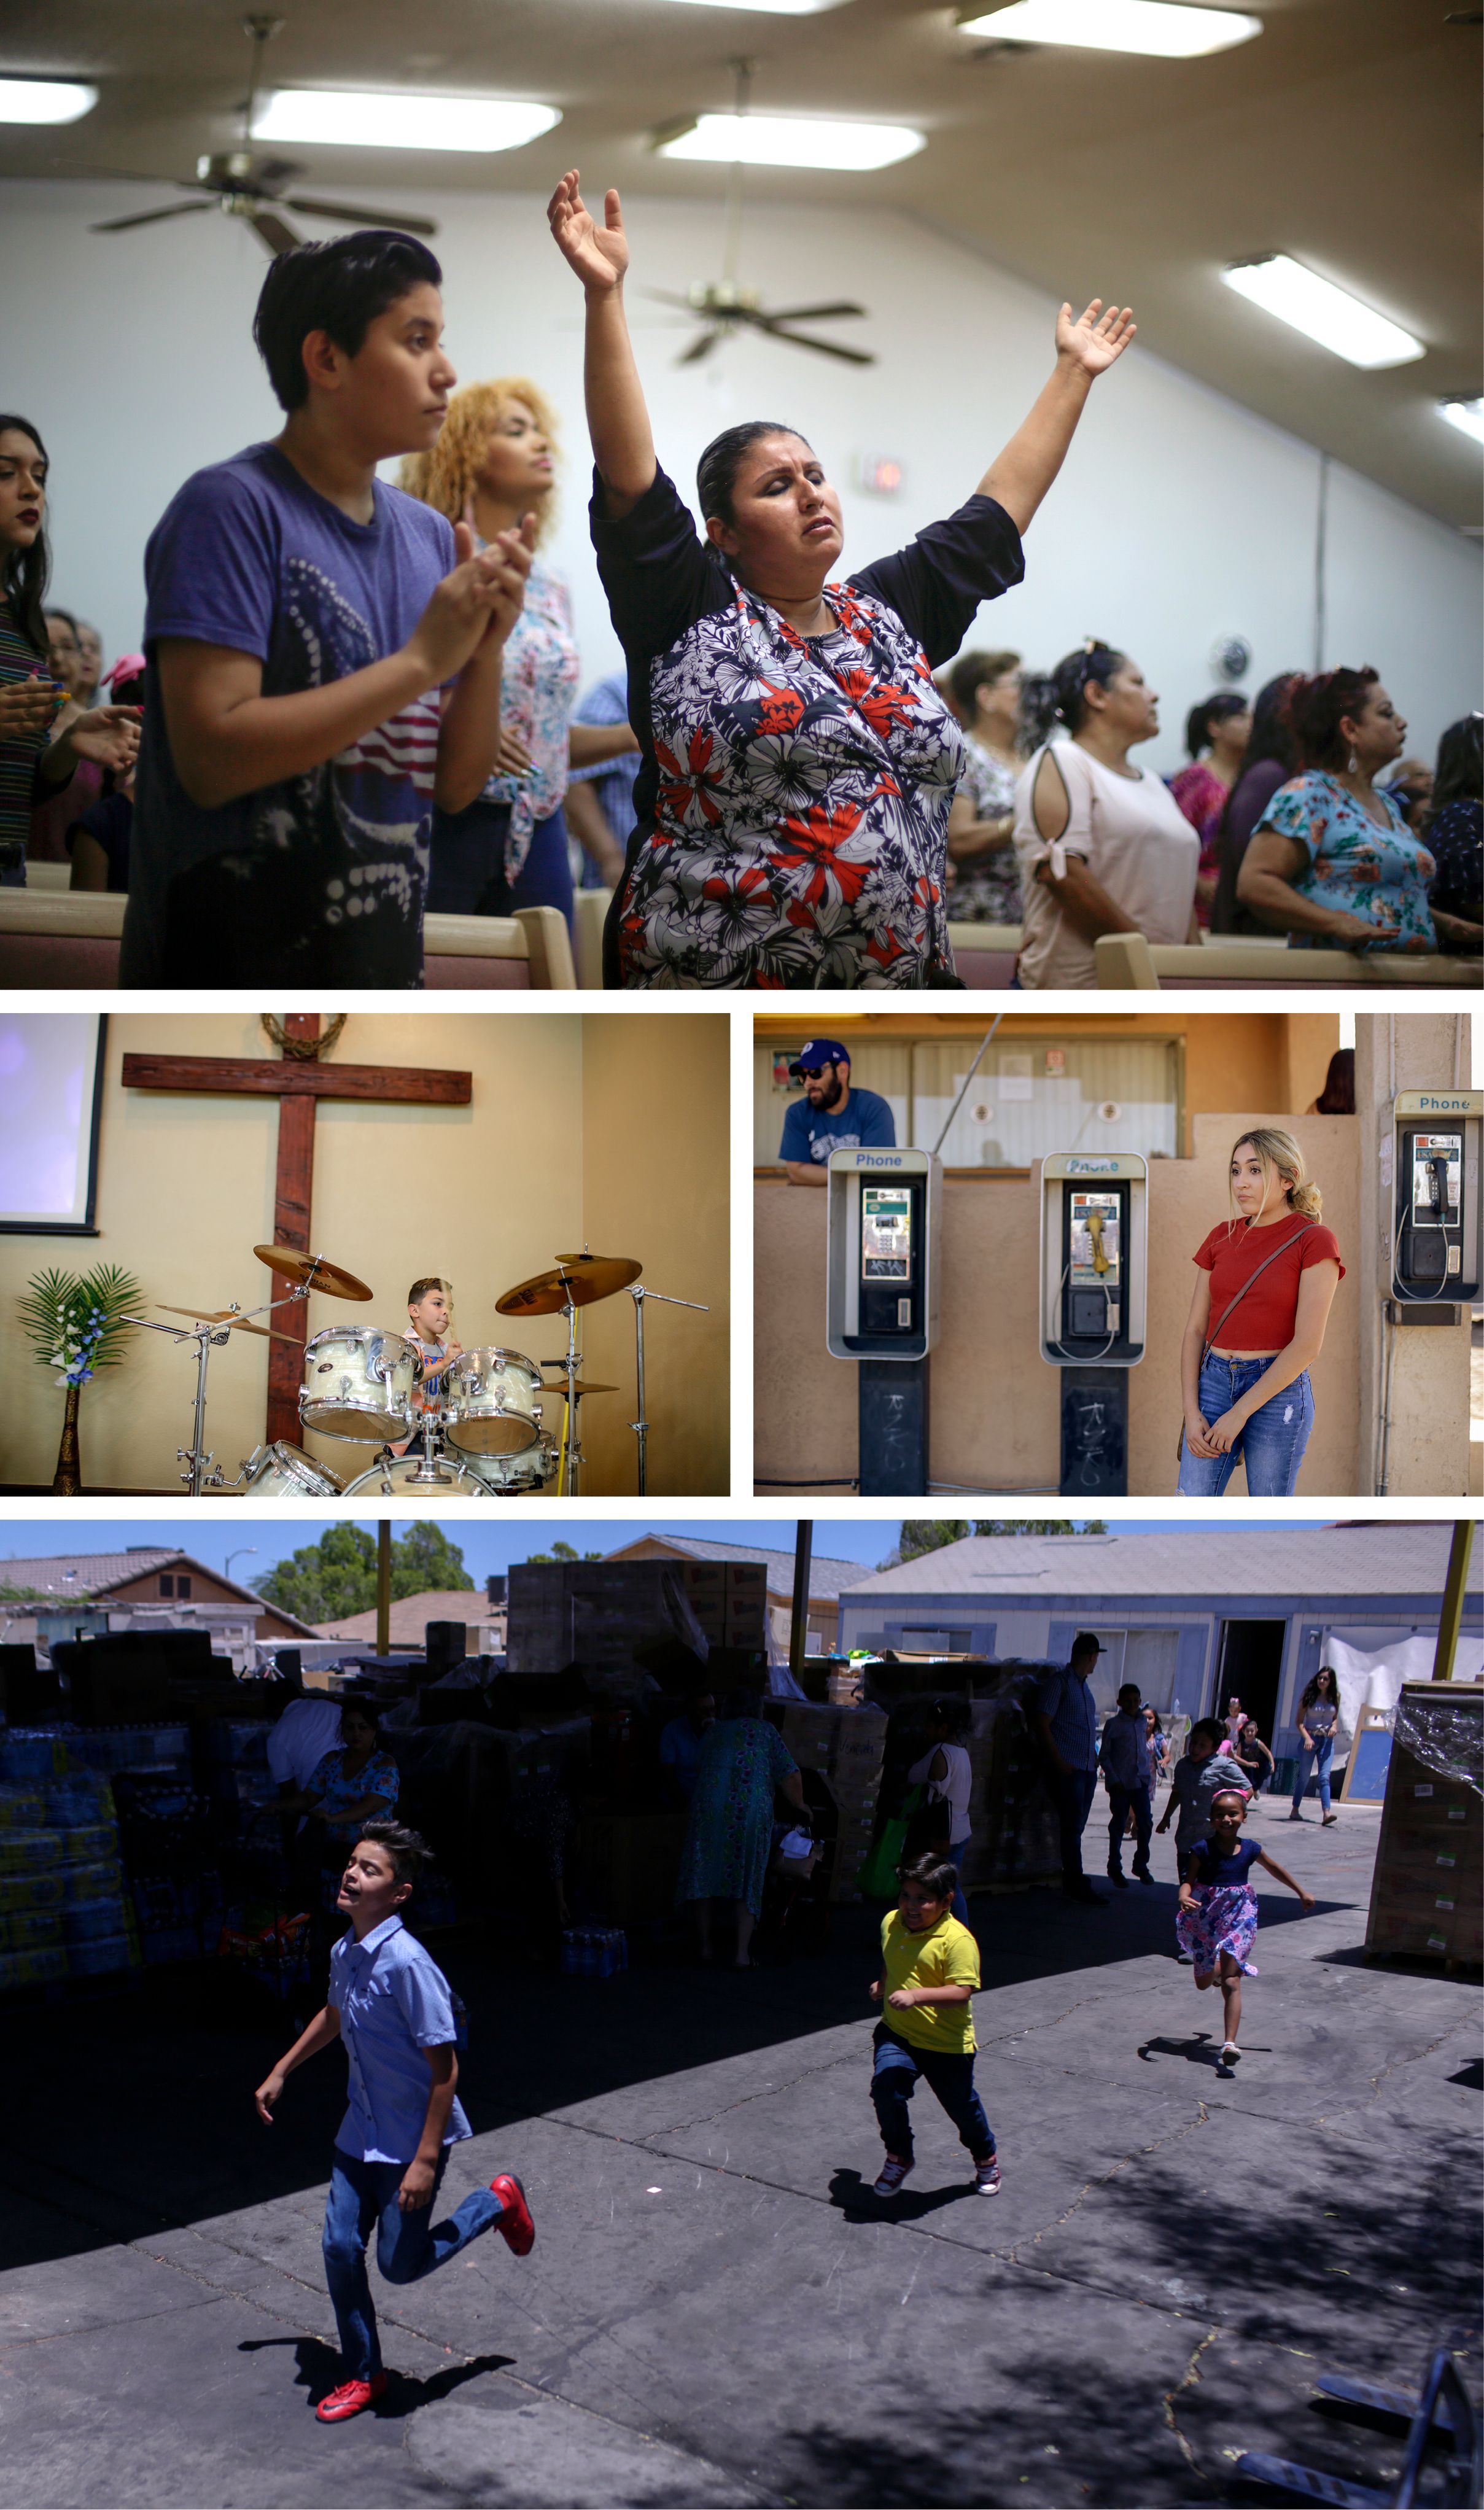 The lives of residents of San Luis, Arizona, and San Luis, Mexico, are deeply entwined. Top and middle left: Worshippers and musicians at Gethsemani Baptist Church in San Luis, Arizona. Middle right: Lupita Dominguez, who lives in Yuma, Arizona, waits for her boyfriend to drive across the border from Mexico. Bottom: Children play in the streets of San Luis, Arizona. Image by Kathleen Flynn. United States, 2019.